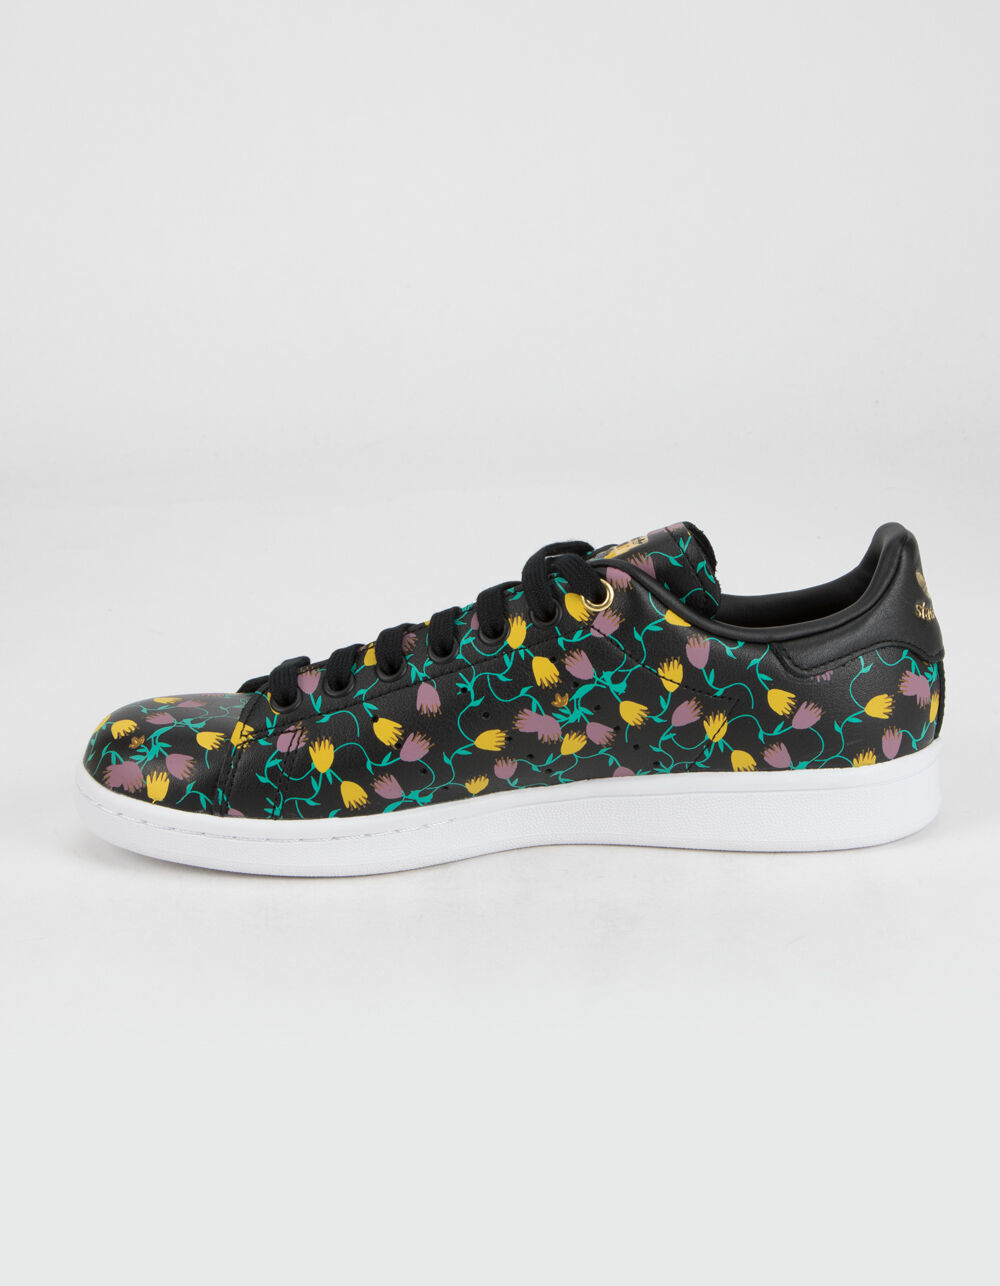 🔥 Adidas Originals STAN SMITH Women's Sneakers Lifestyle FLORAL 🌺 US  8.5